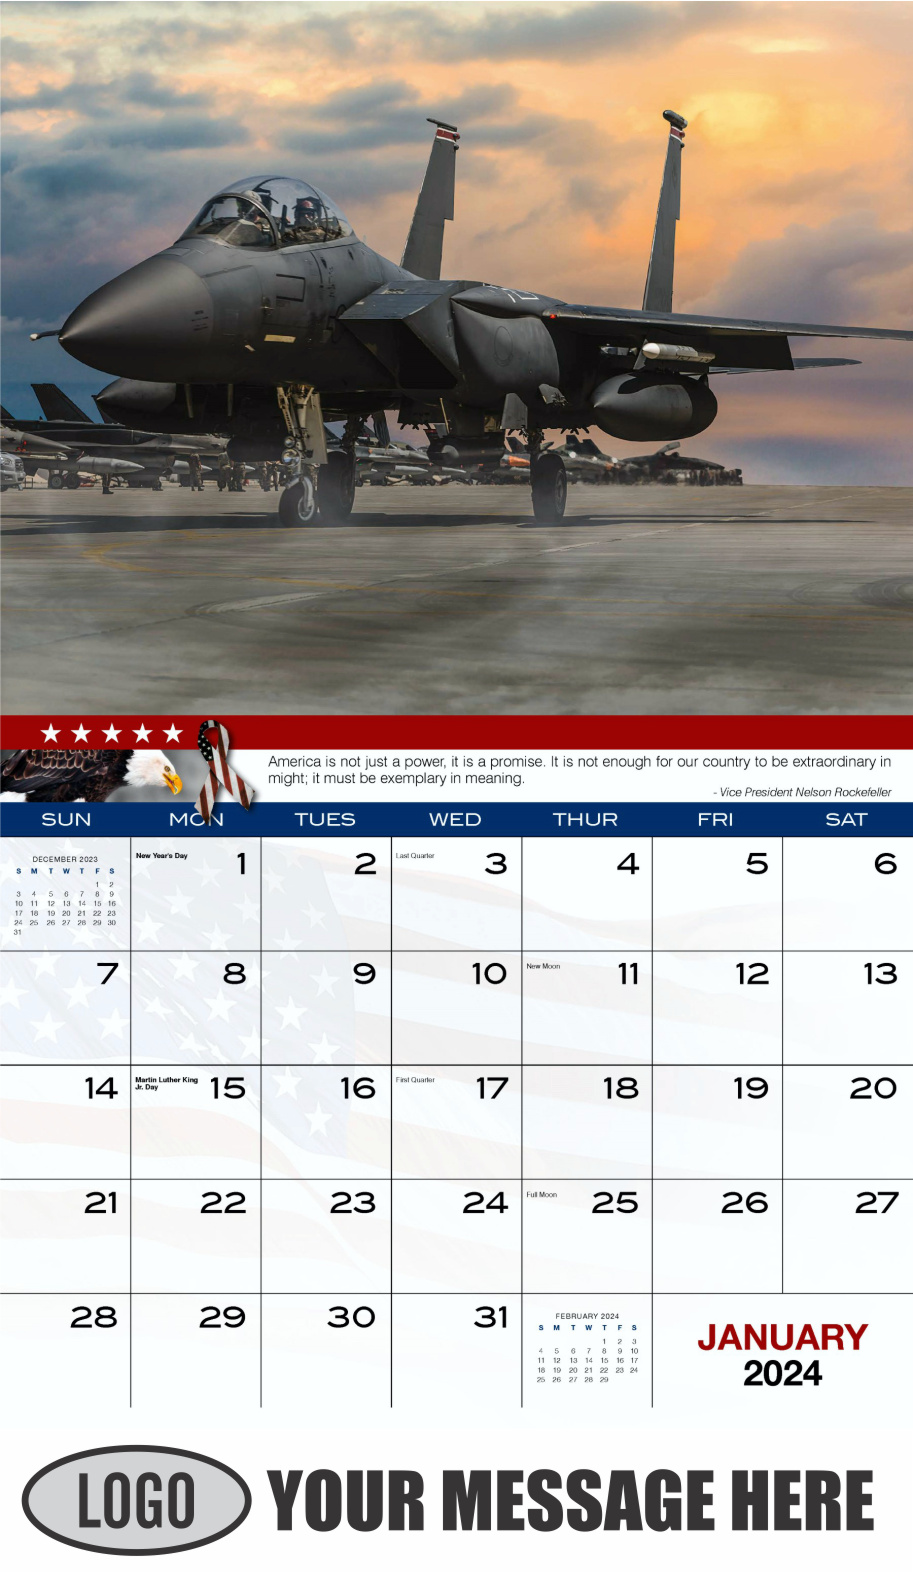 Home of the Brave 2024 USA Armed Forces Business Promo Calendar - January